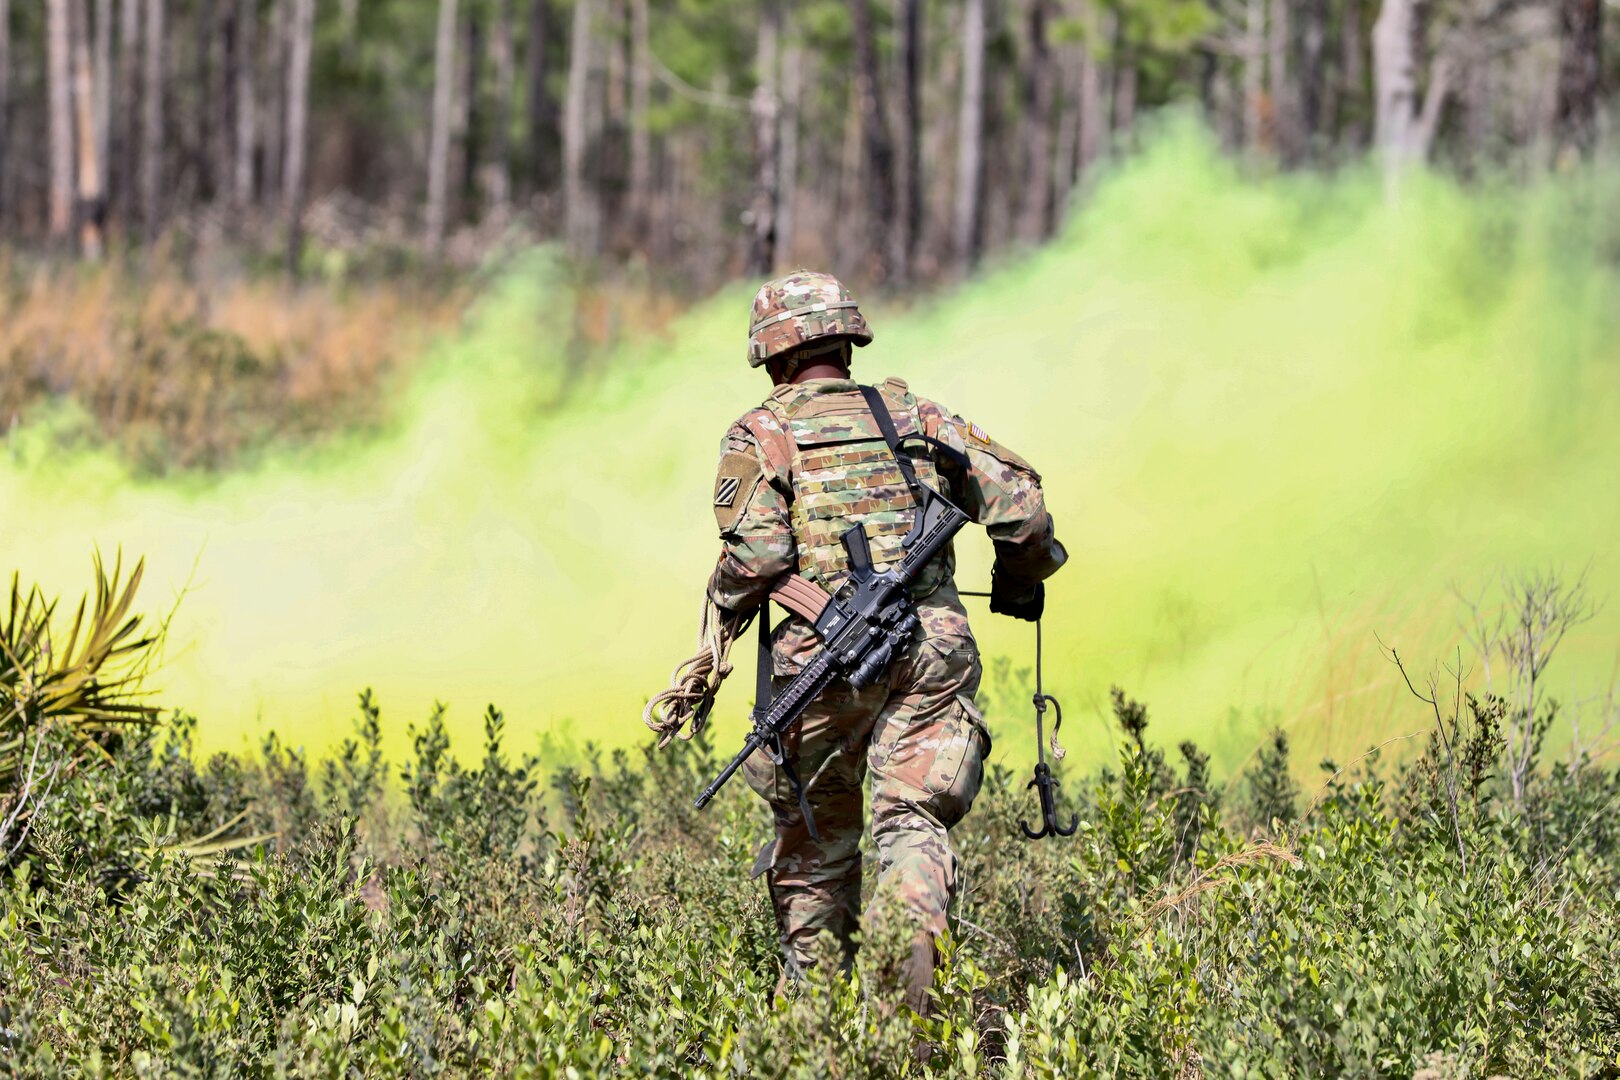 A Soldier from the Georgia Army National Guard's 177th Brigade Engineer Battalion prepares to breach an obstacle during a combined arms live-fire exercise in Fort Stewart, Ga., March 4, 2023. The exercise validated six infantry platoons and enabled the battalion to test its warfighting functions.